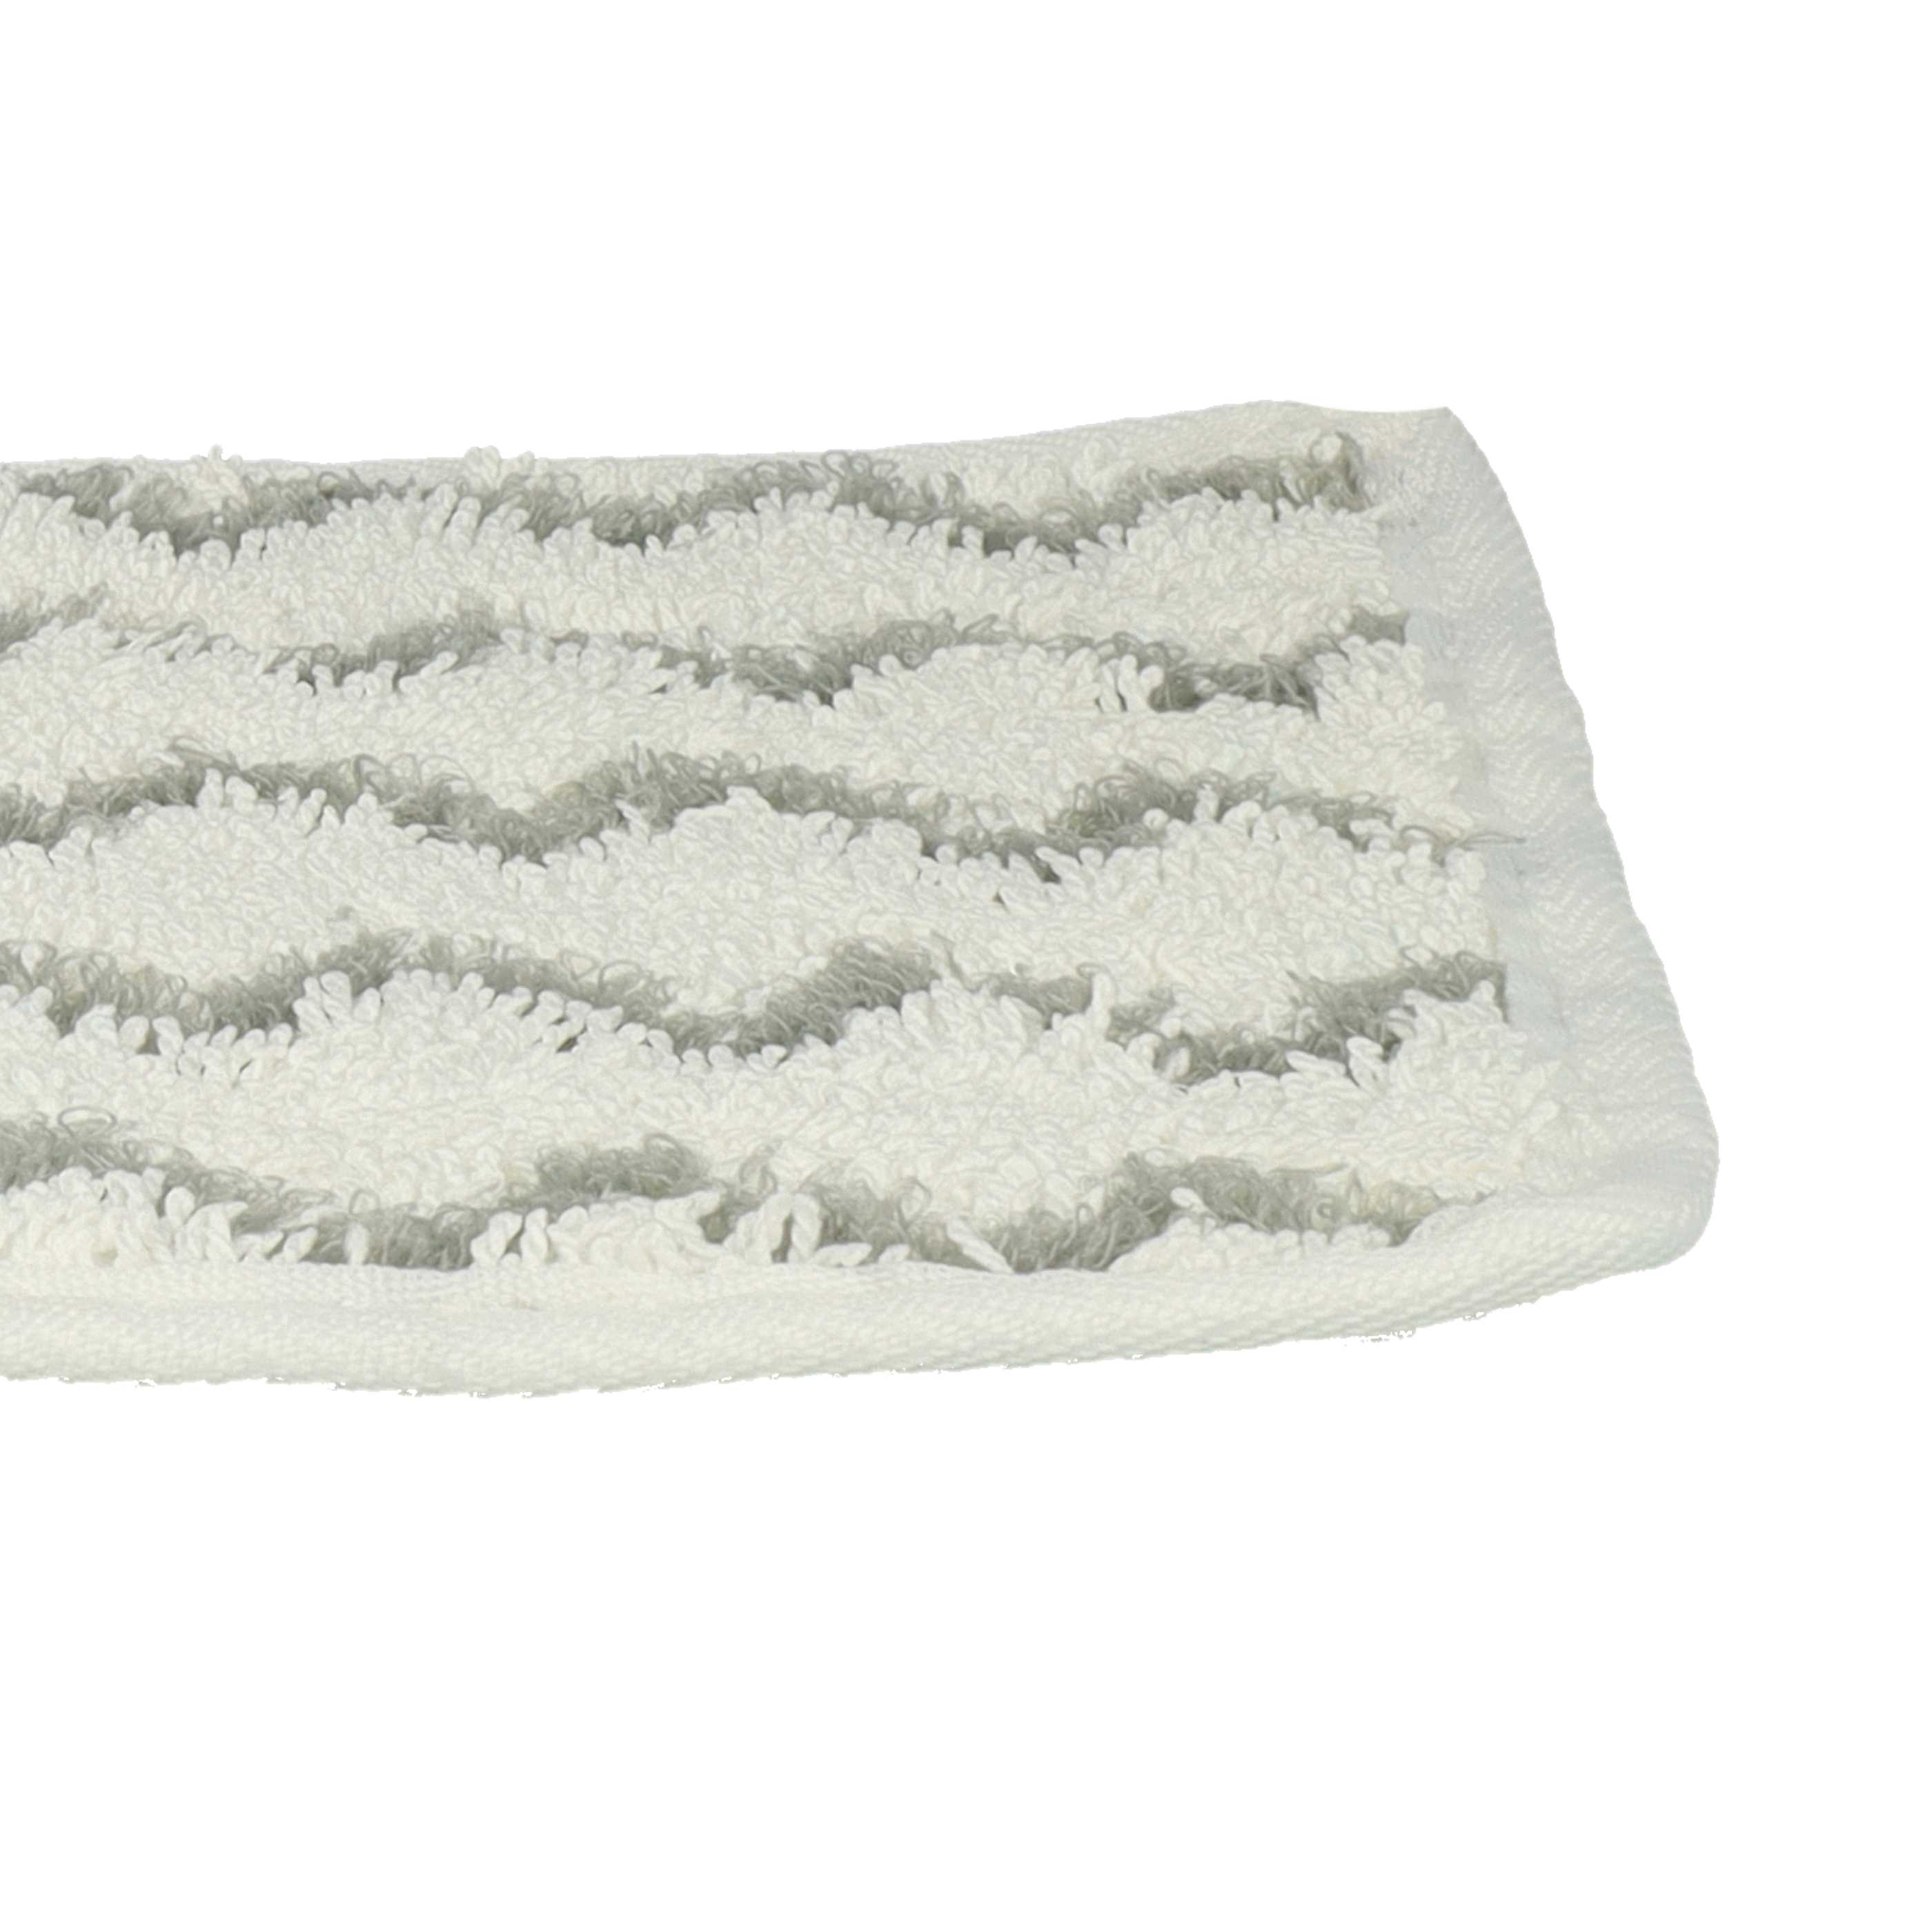 5x Cleaning Pad replaces Vileda 161717 for ViledaHot Spray Steamer, Steam Mop - Microfibre Grey White